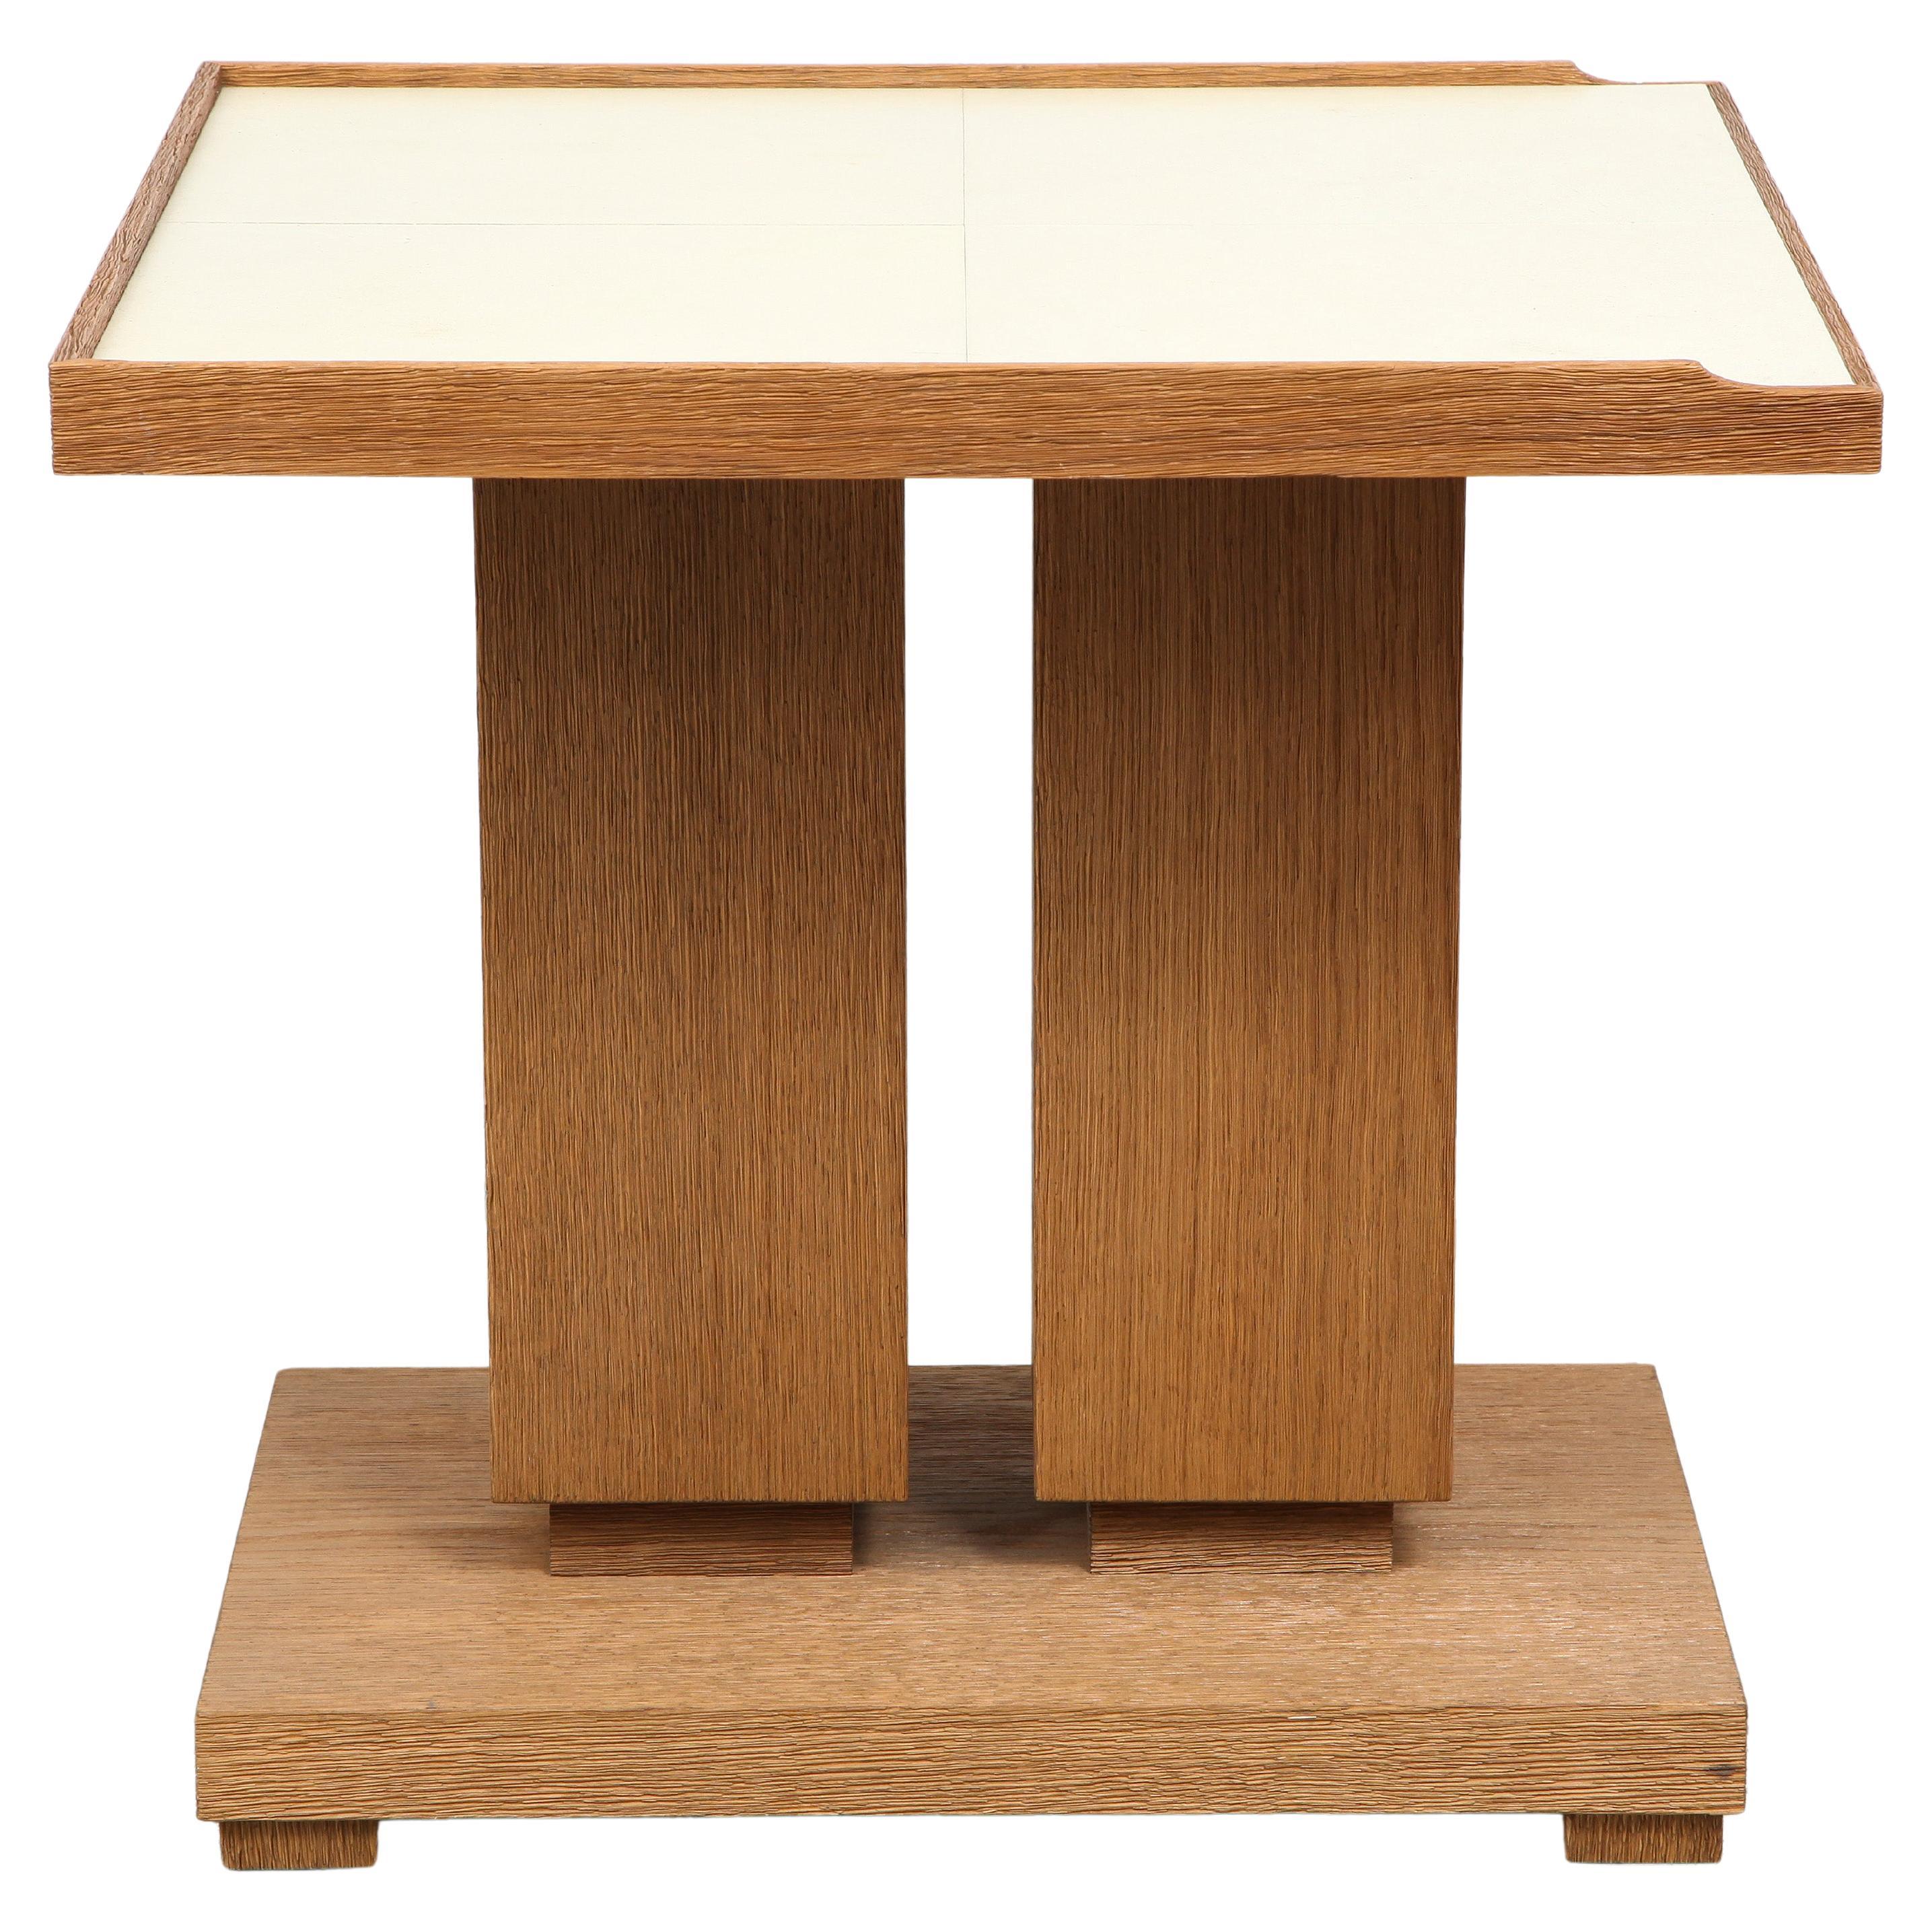 Bespoke Cerused Oak and Parchment Table in the Dupre Lafon Manner For Sale